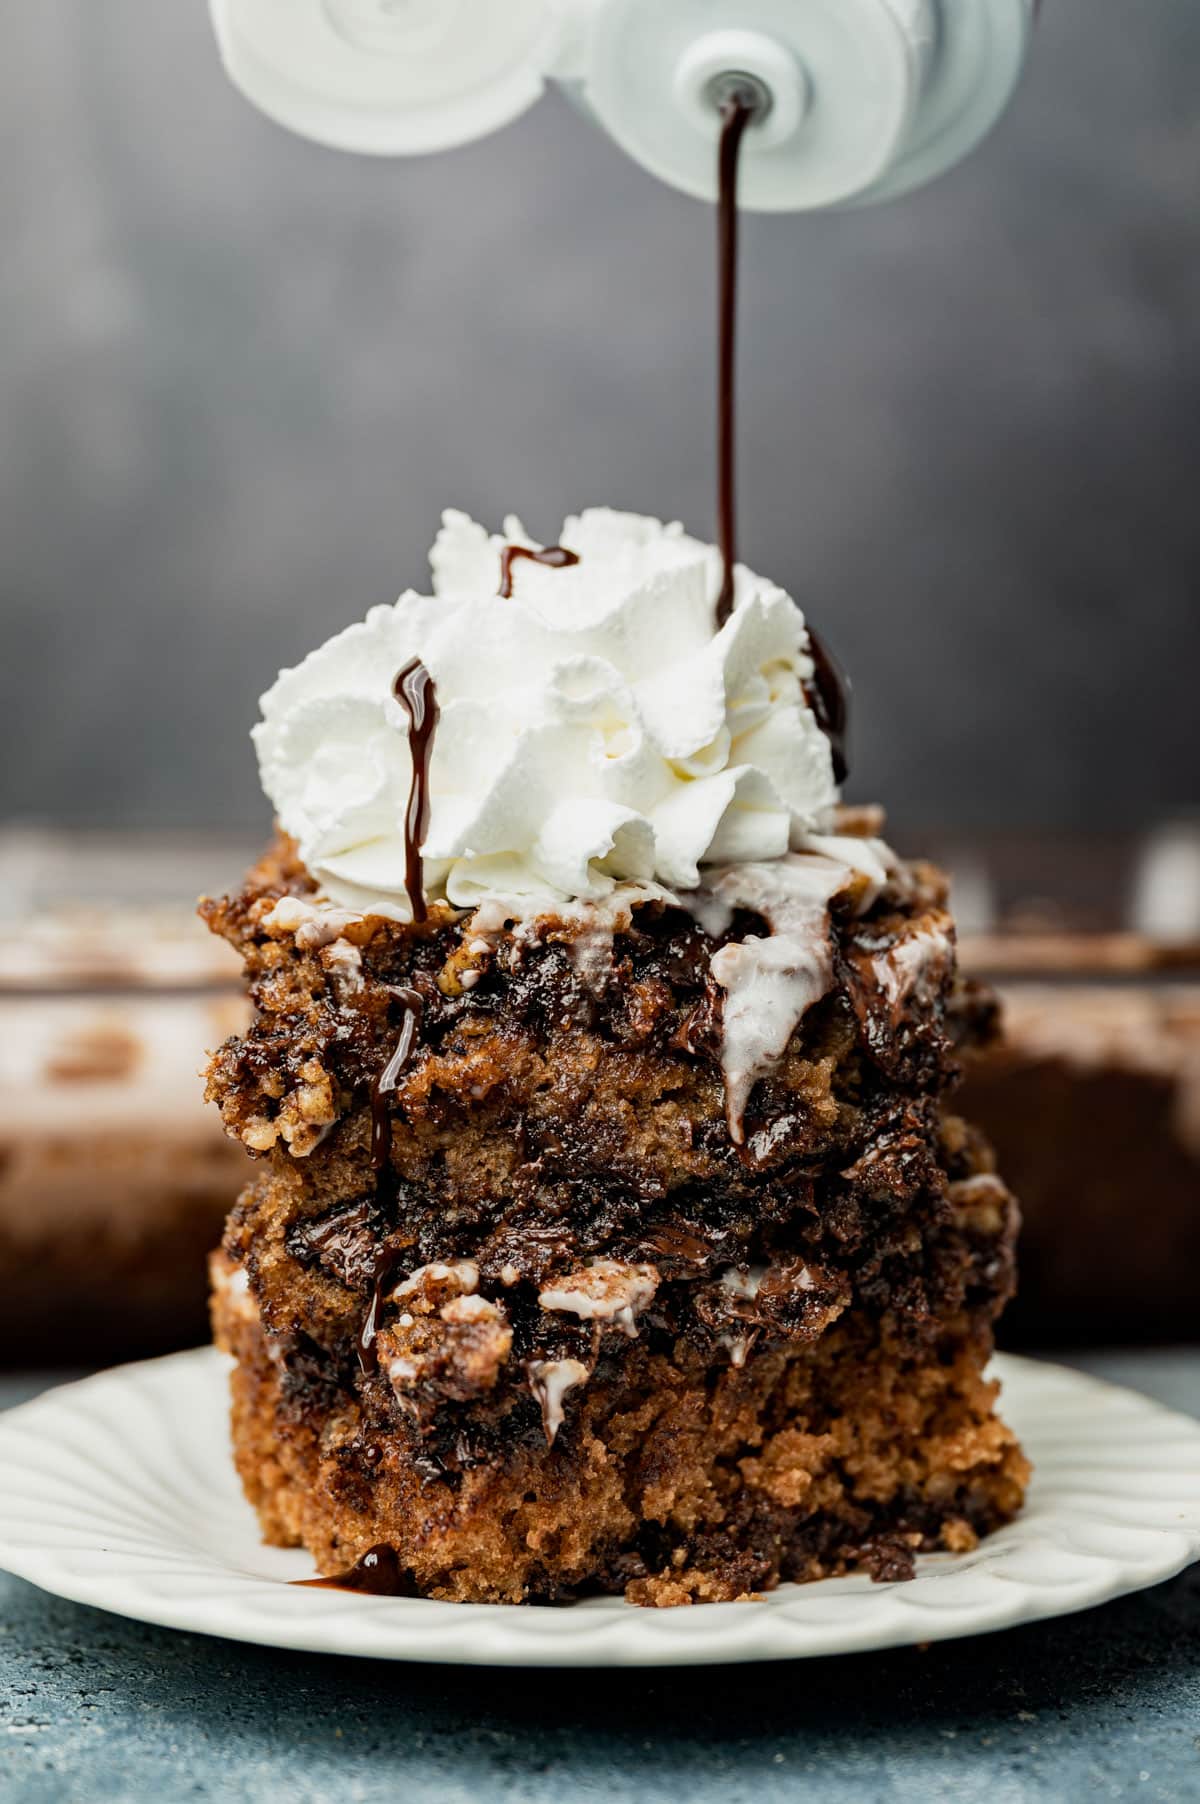 drizzling chocolate over chocolate chip oatmeal cake with whipped cream